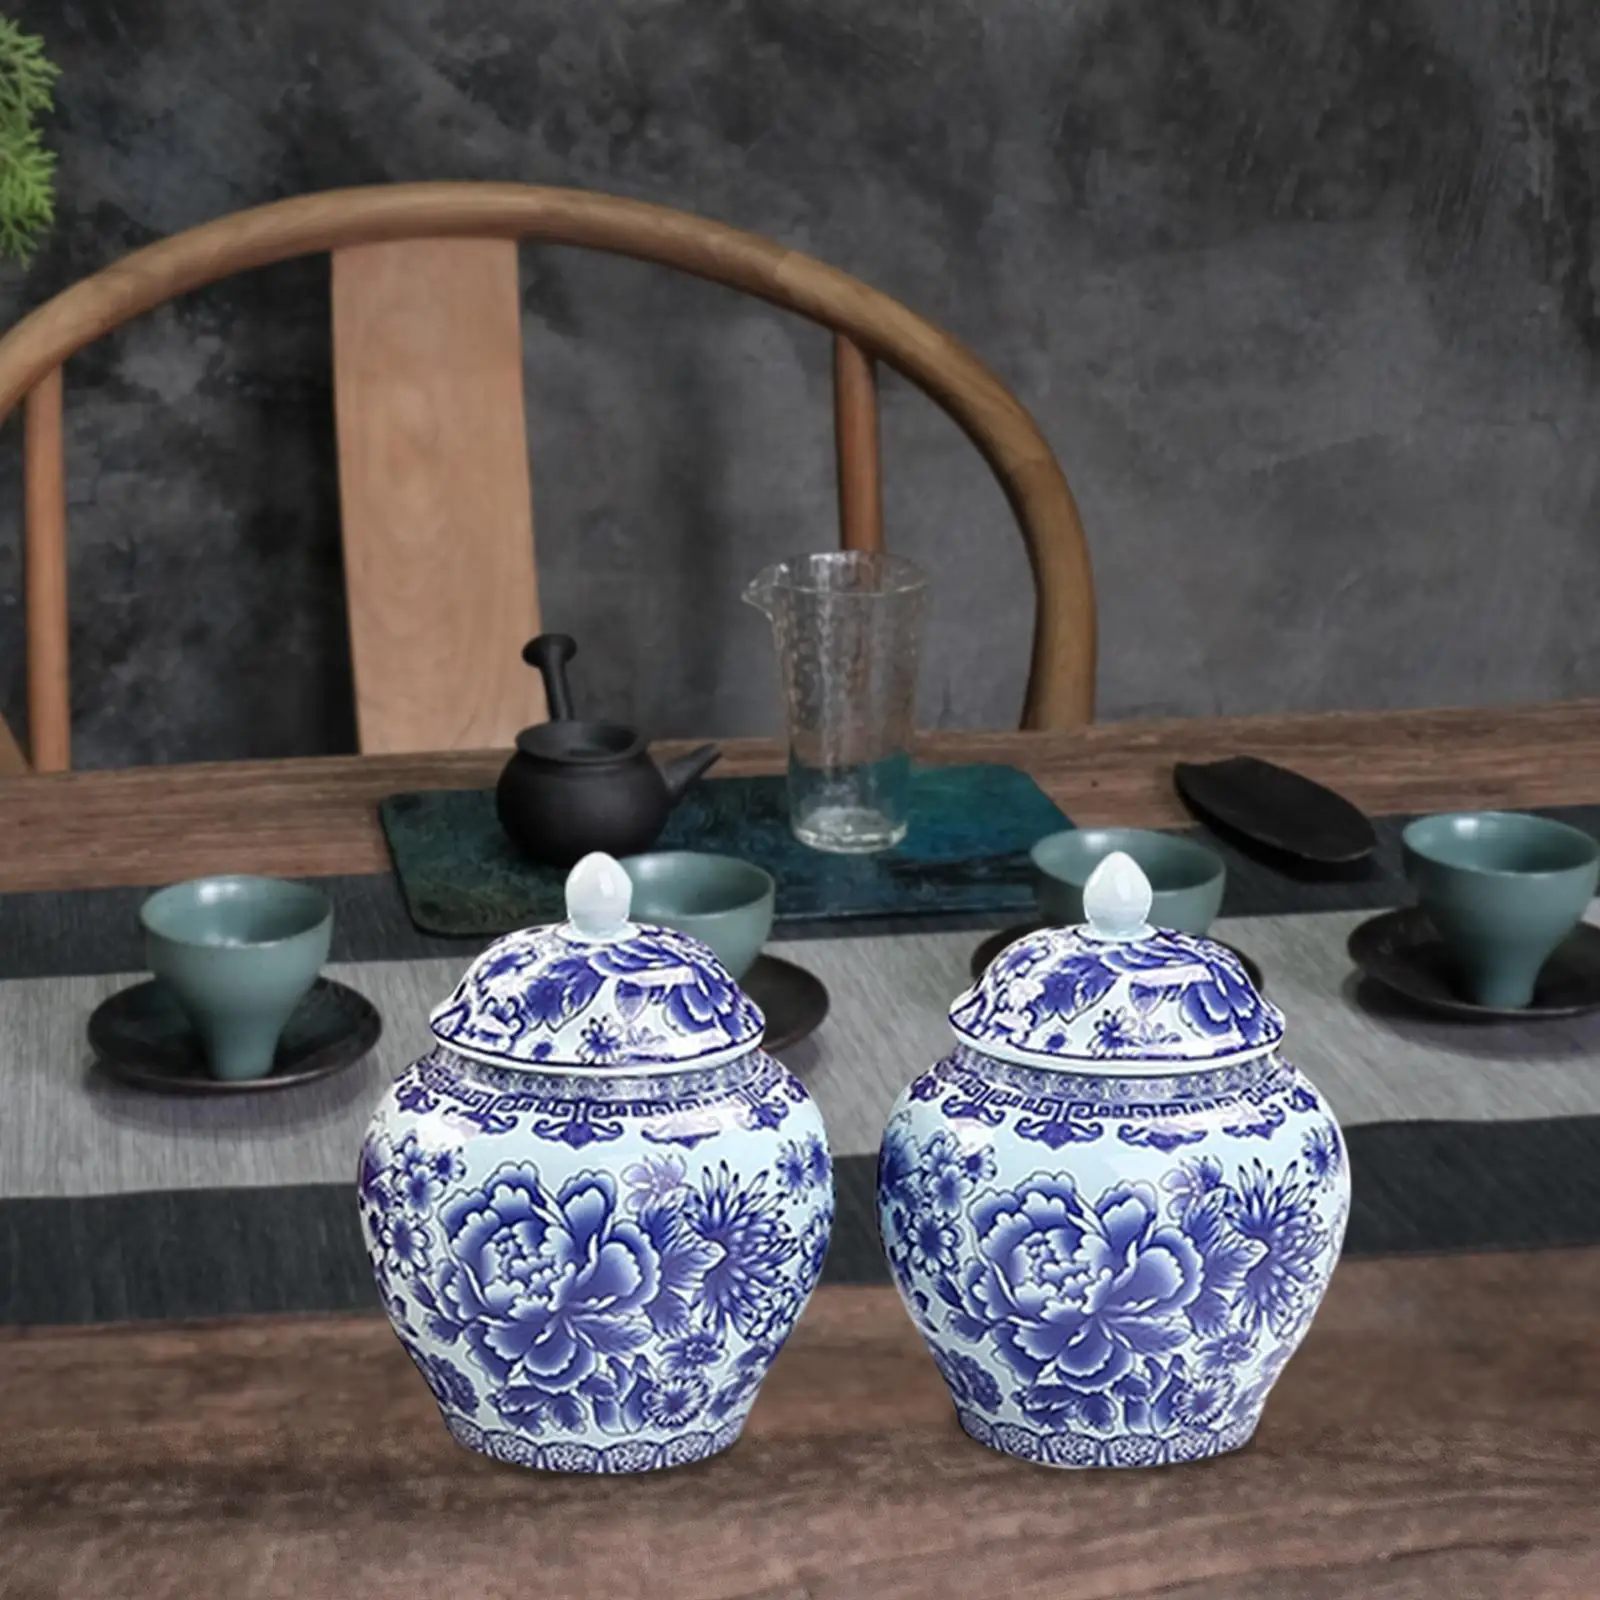 Ceramic Temple Ginger Jars with Lid Table Centerpiece Tea Canister Flower Vases for Office Cabinet Desktop Weddings Collection